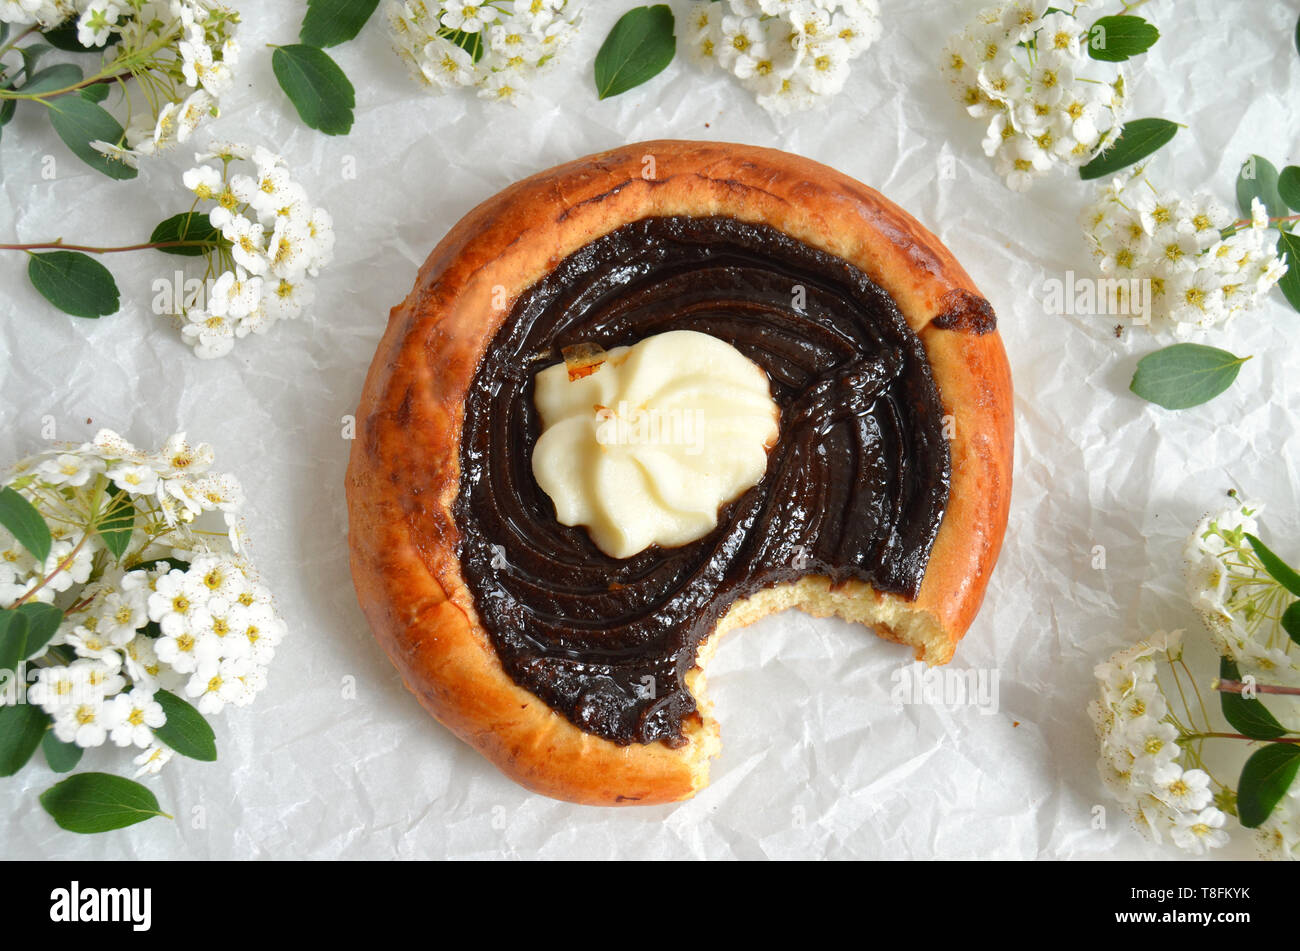 Traditional czech baked pastry product - yeast dough kolache with dark plum preserve (povidla) and quark cheese (tvaroh). Kolach is lying on a paper s Stock Photo